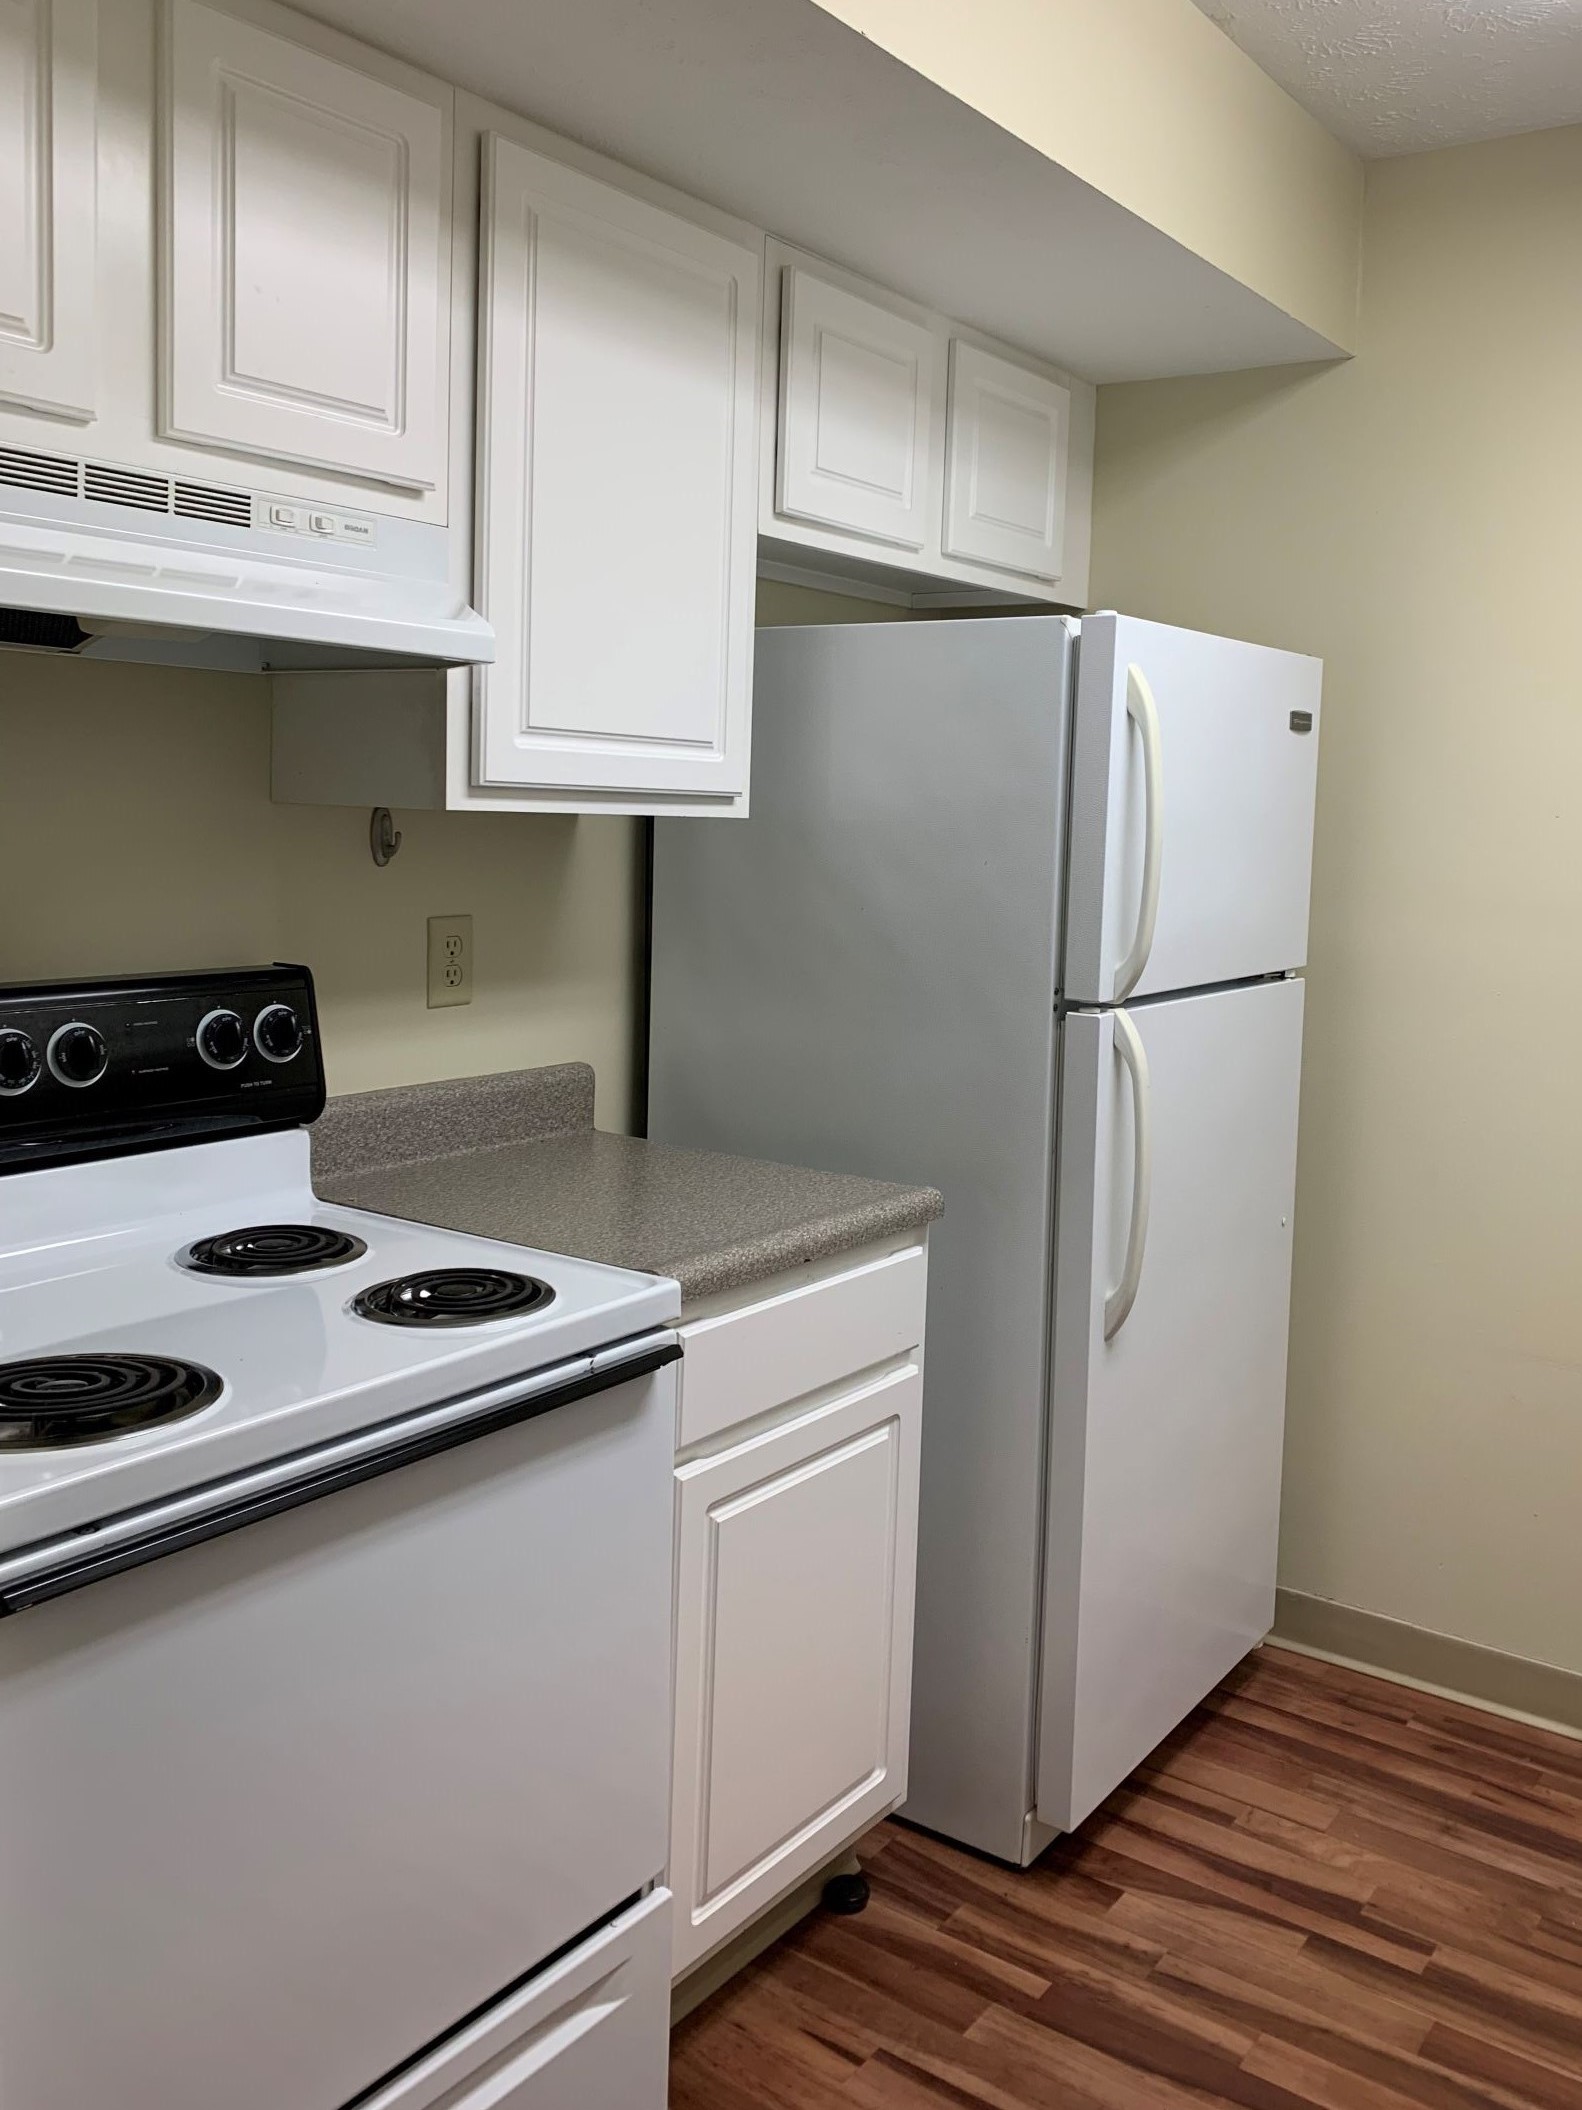 Village Apartments kitchen with white cabinets and refrigerator